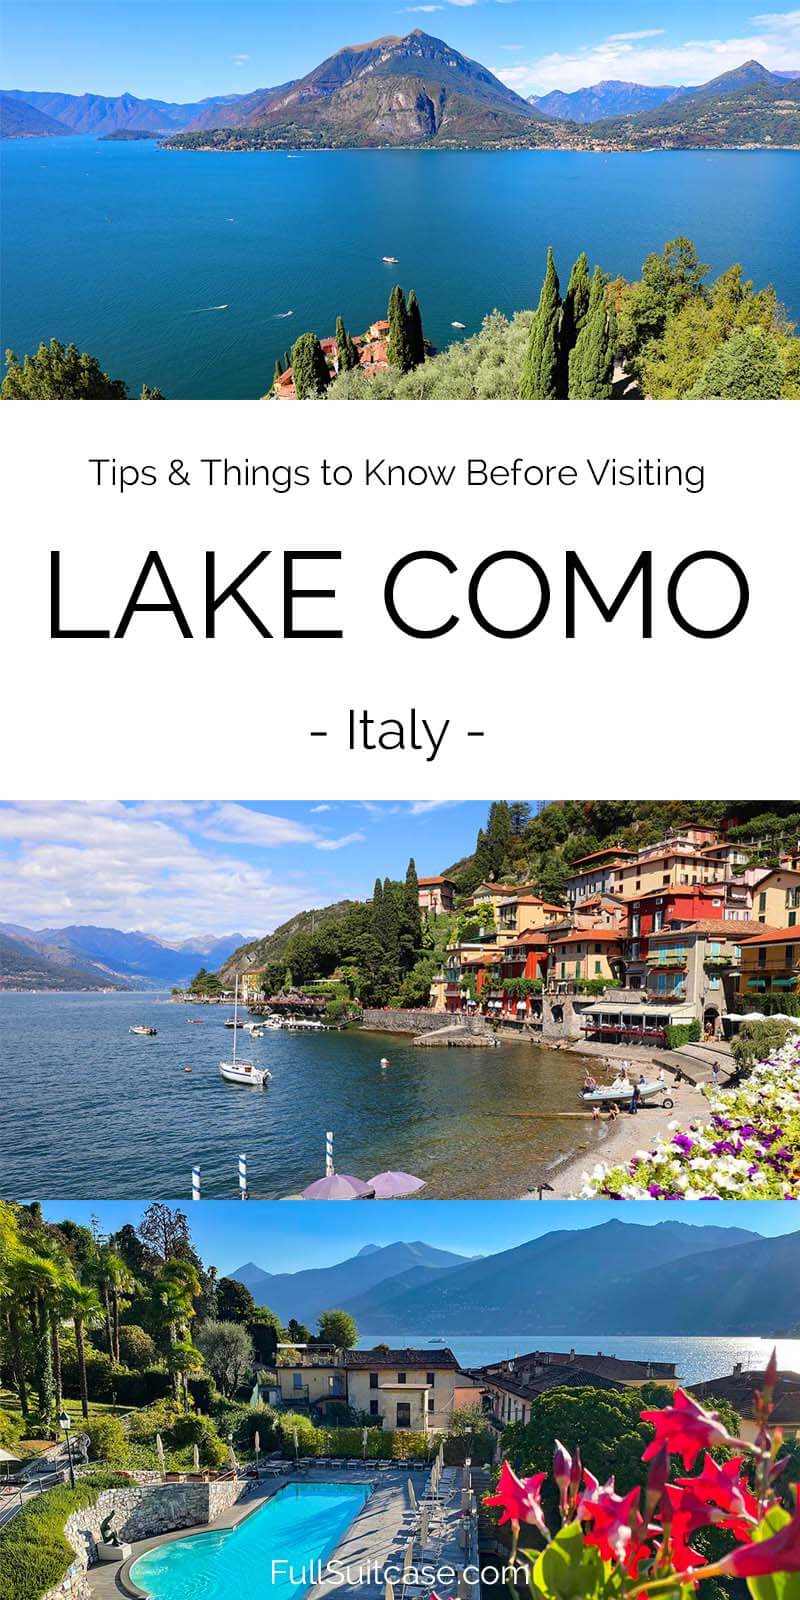 Travel tips for visiting Lake Como in Italy